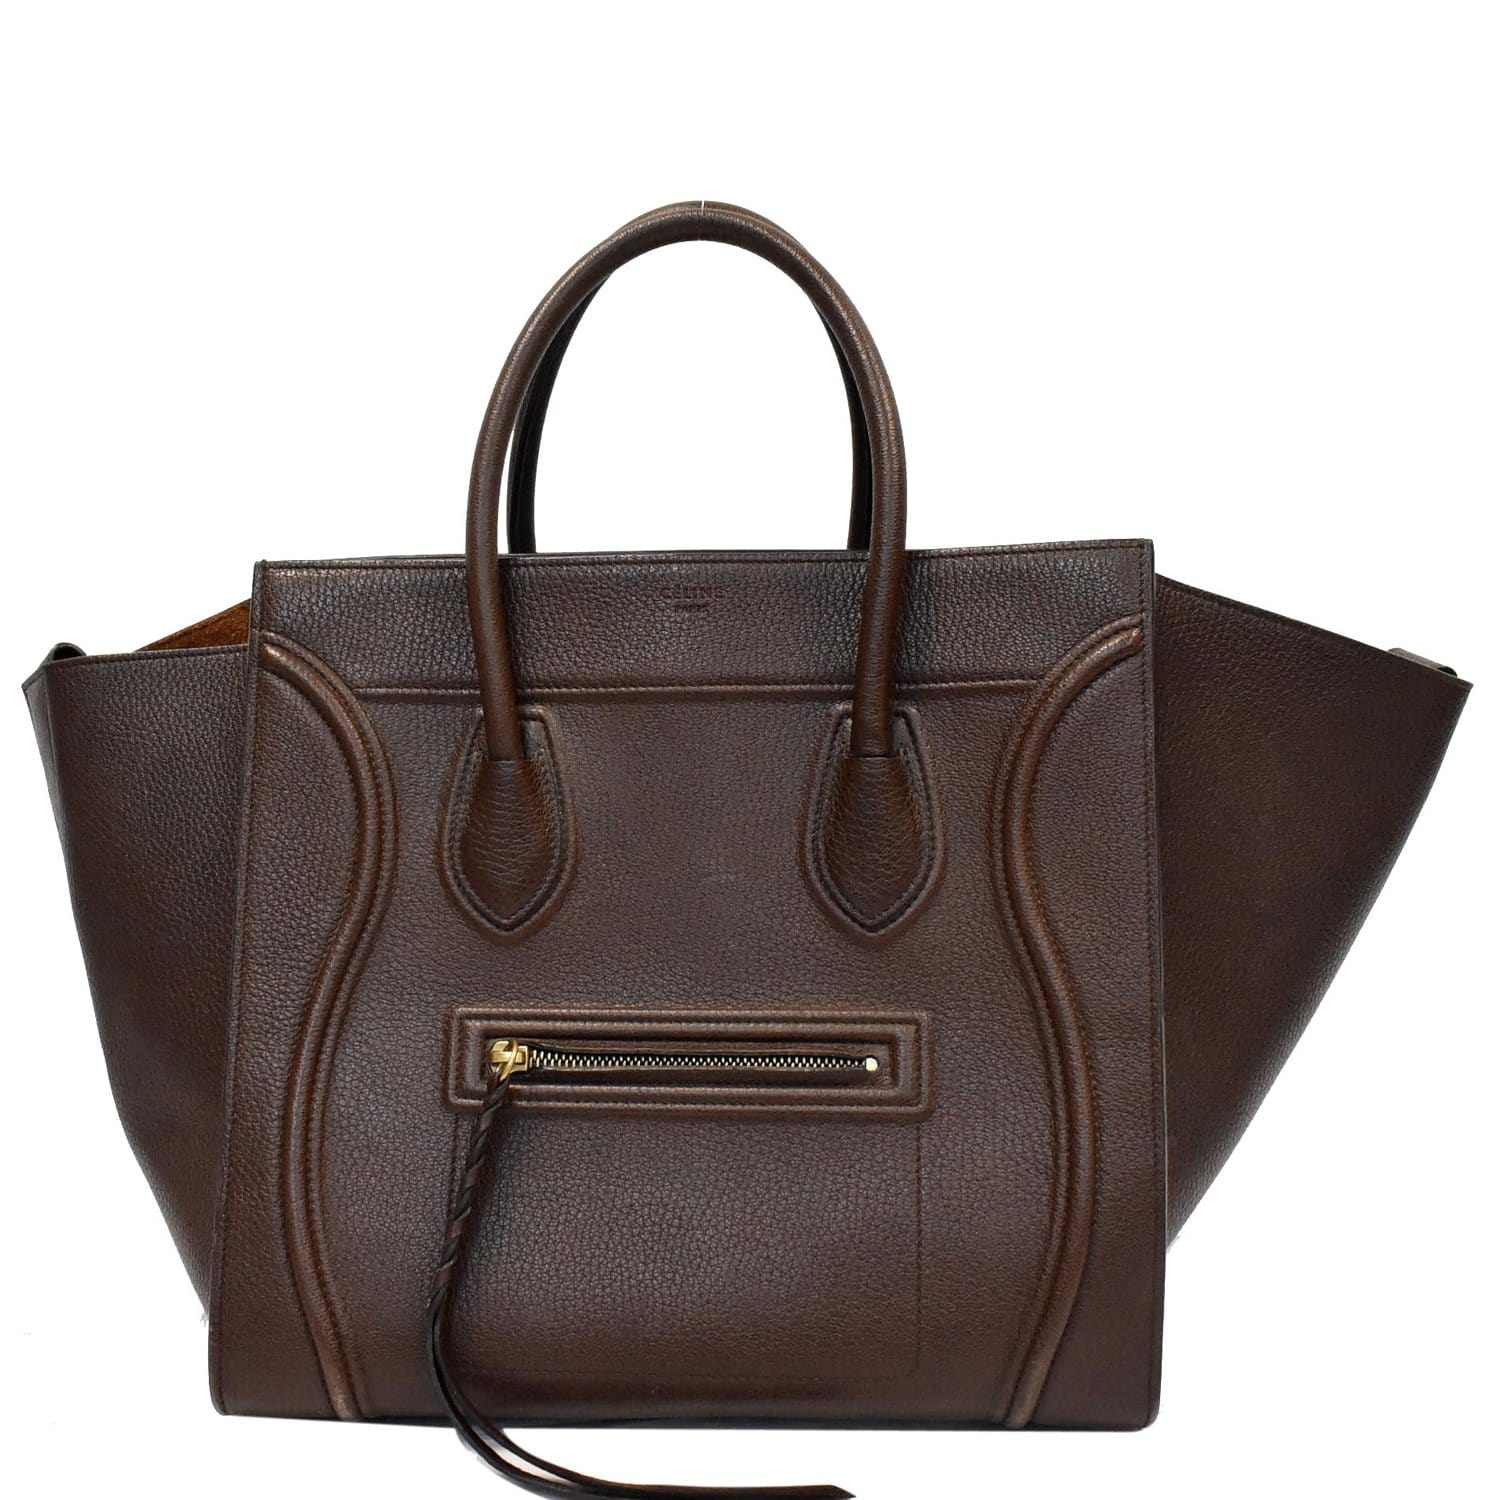 Celine Pre-owned Women's Leather Handbag - Brown - One Size